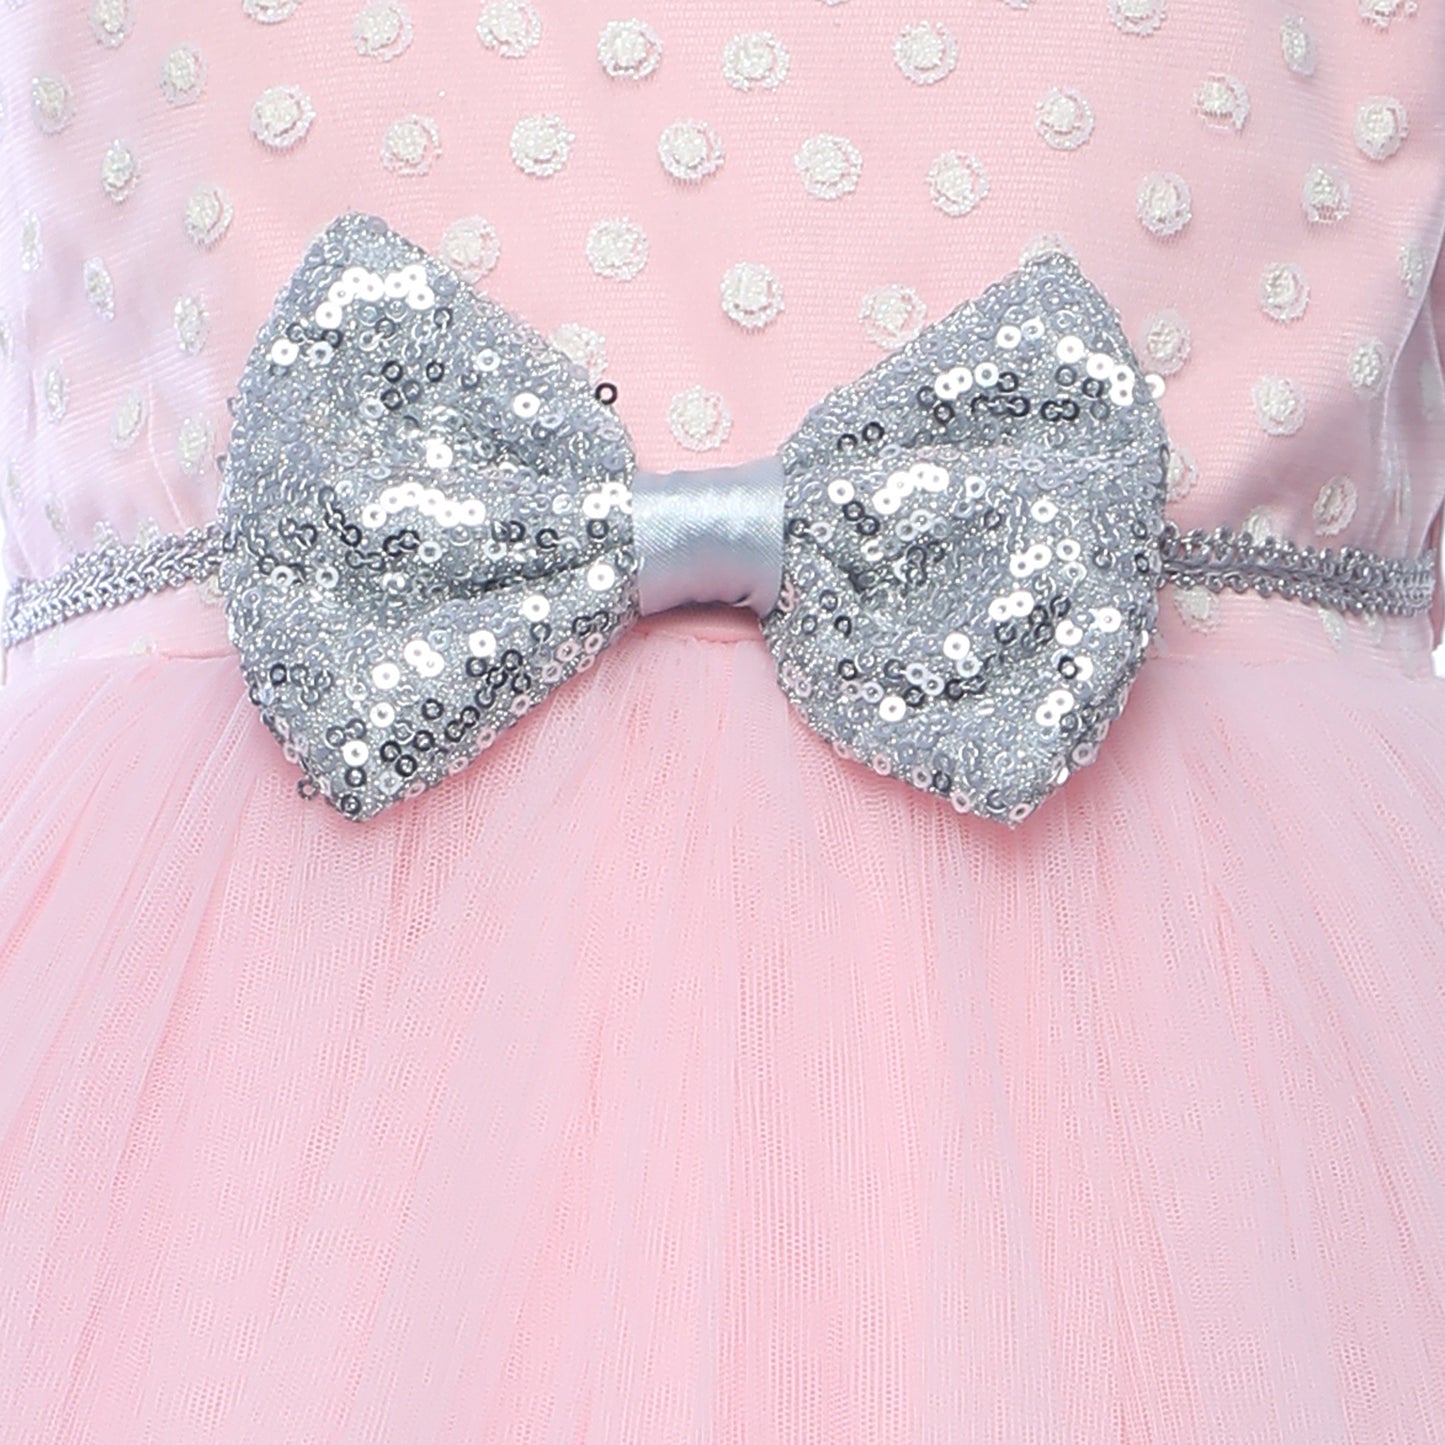 Pink Polka Dot with Bow Dress - Perfect for Mini Mouse Theme Birthday Parties, Weddings Flower Girls